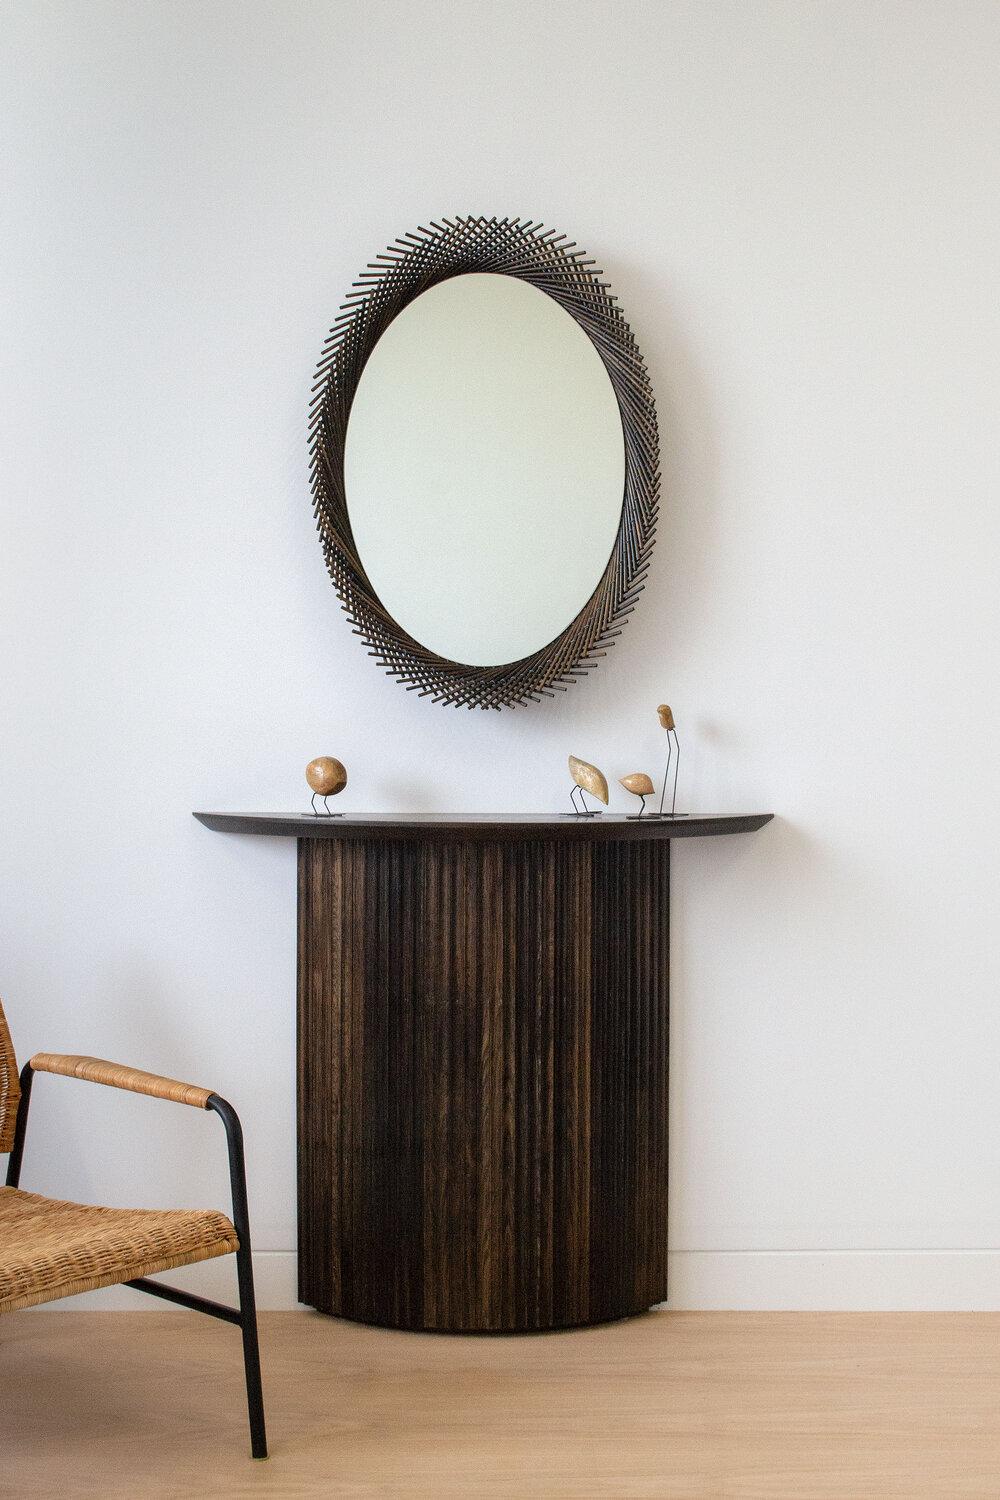 Mooda Mirror Oval 28 / Oxidized Oak Wood, Clear Mirror by INDO- In New Condition For Sale In Rumford, RI